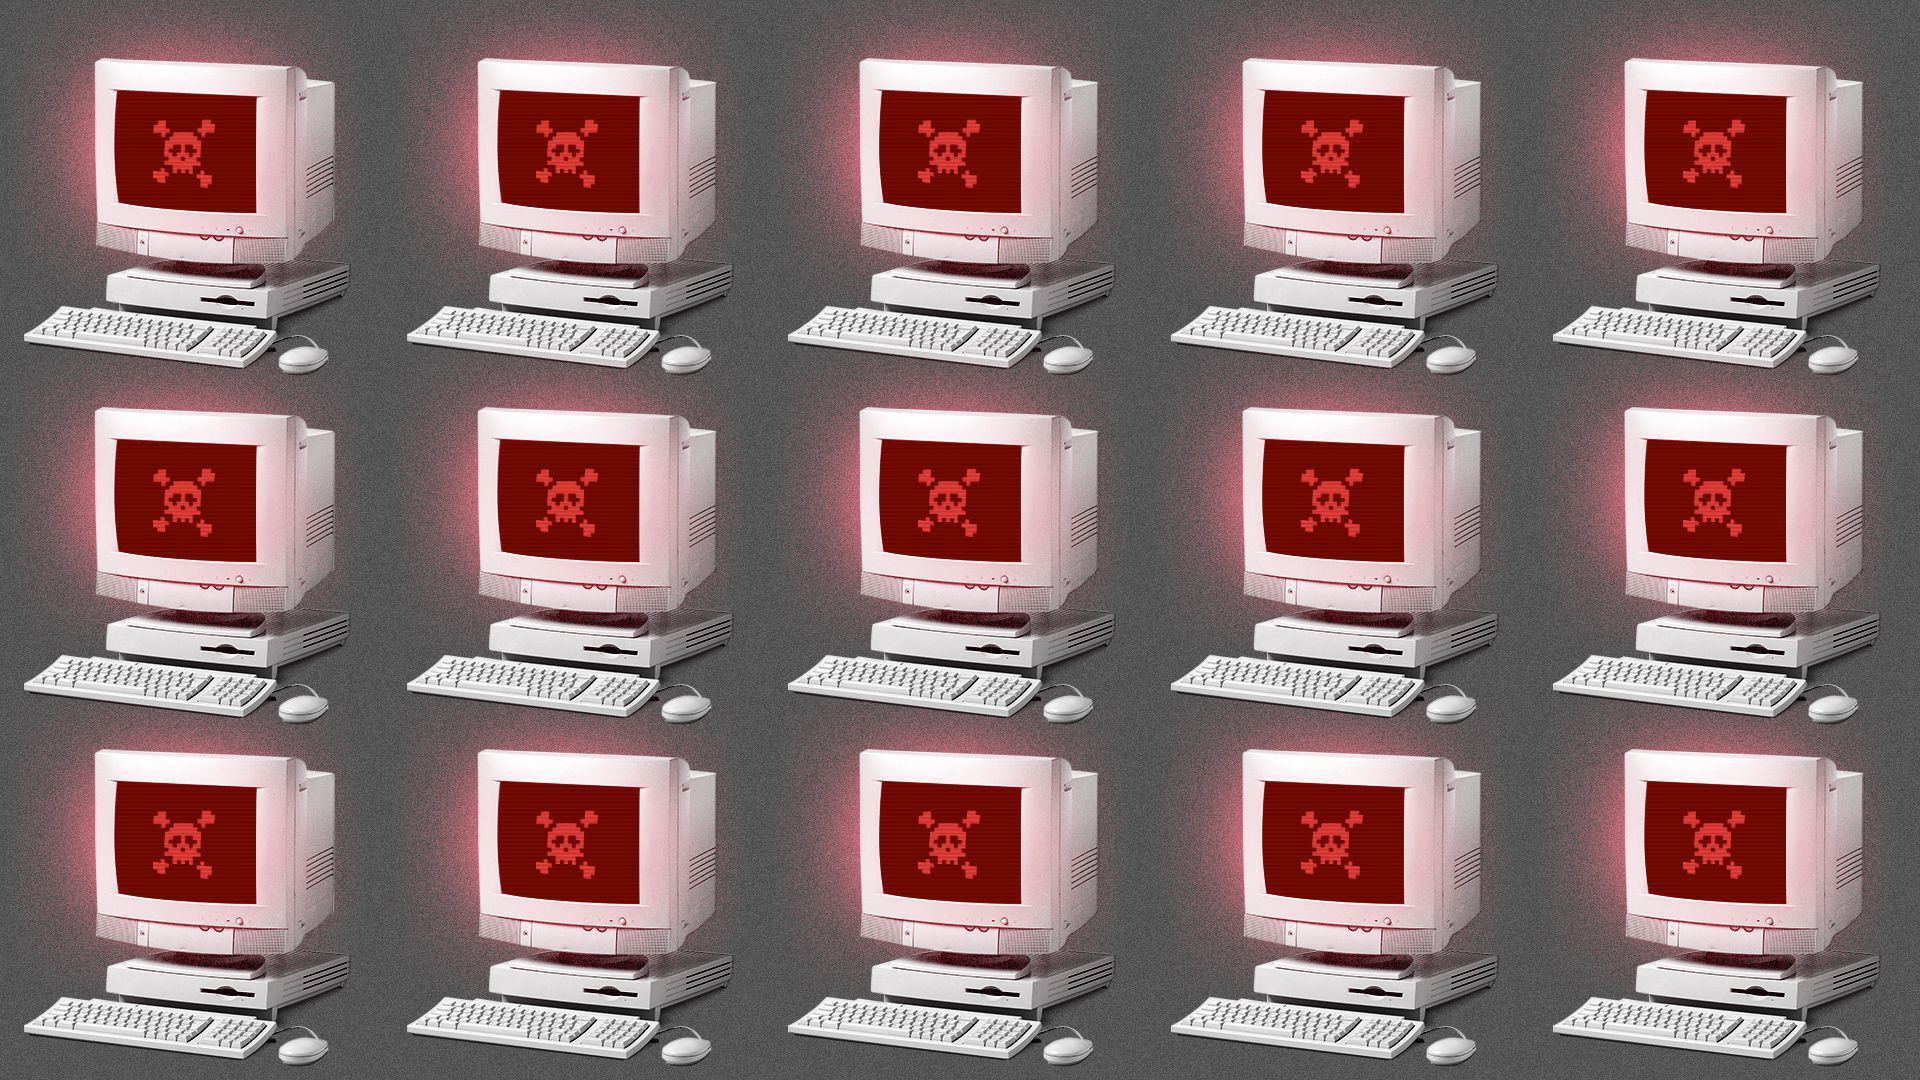 Computers with ransomware on them